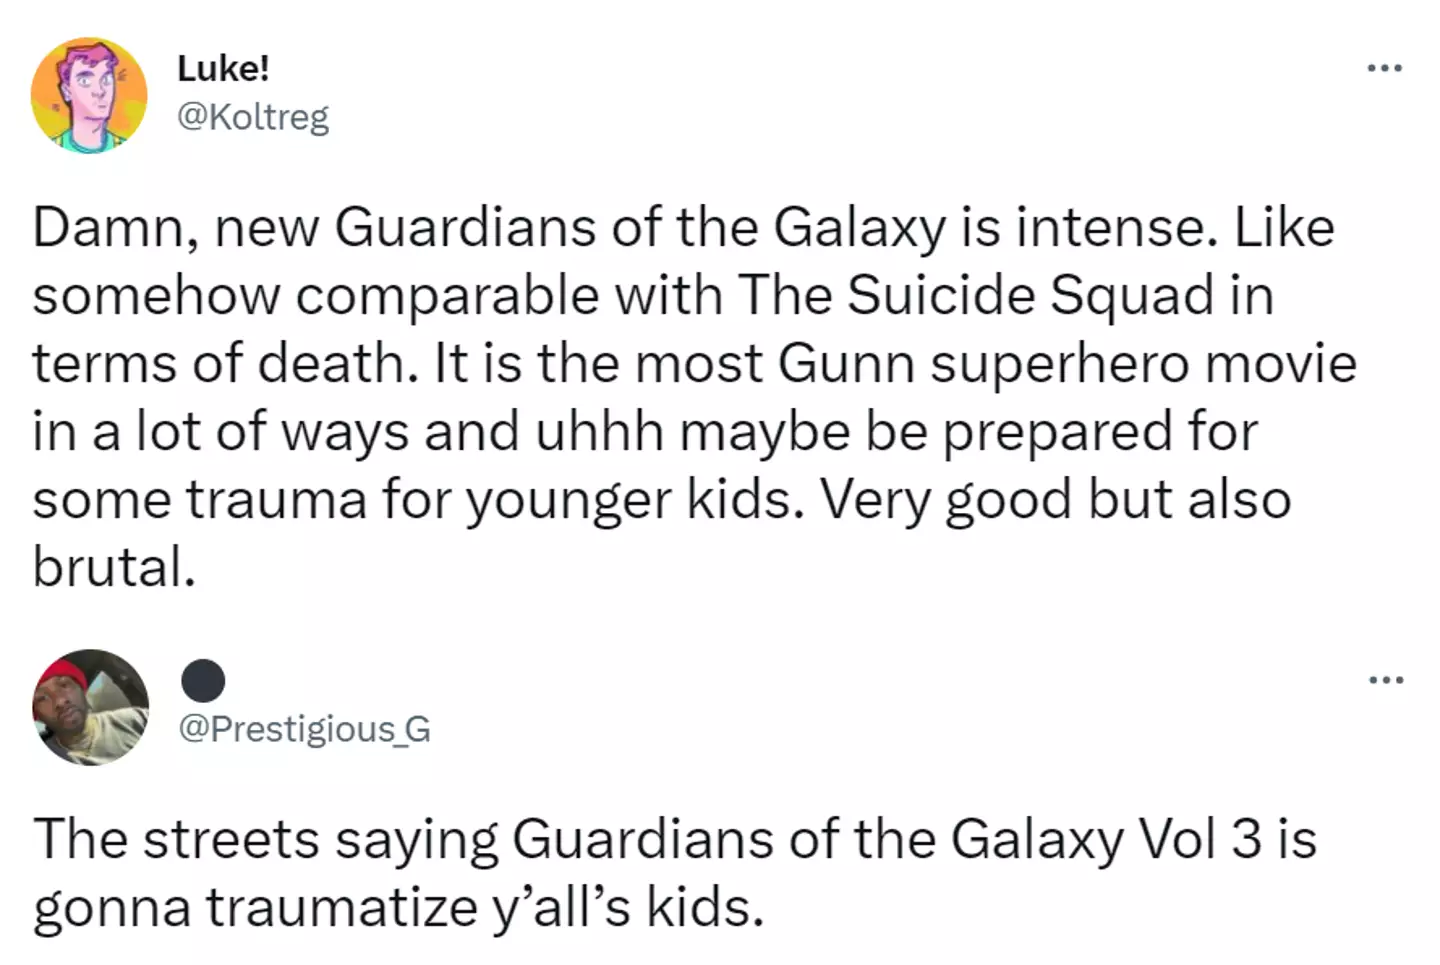 Some fans of Guardians of the Galaxy think it's going to be a pretty tough watch for younger children.